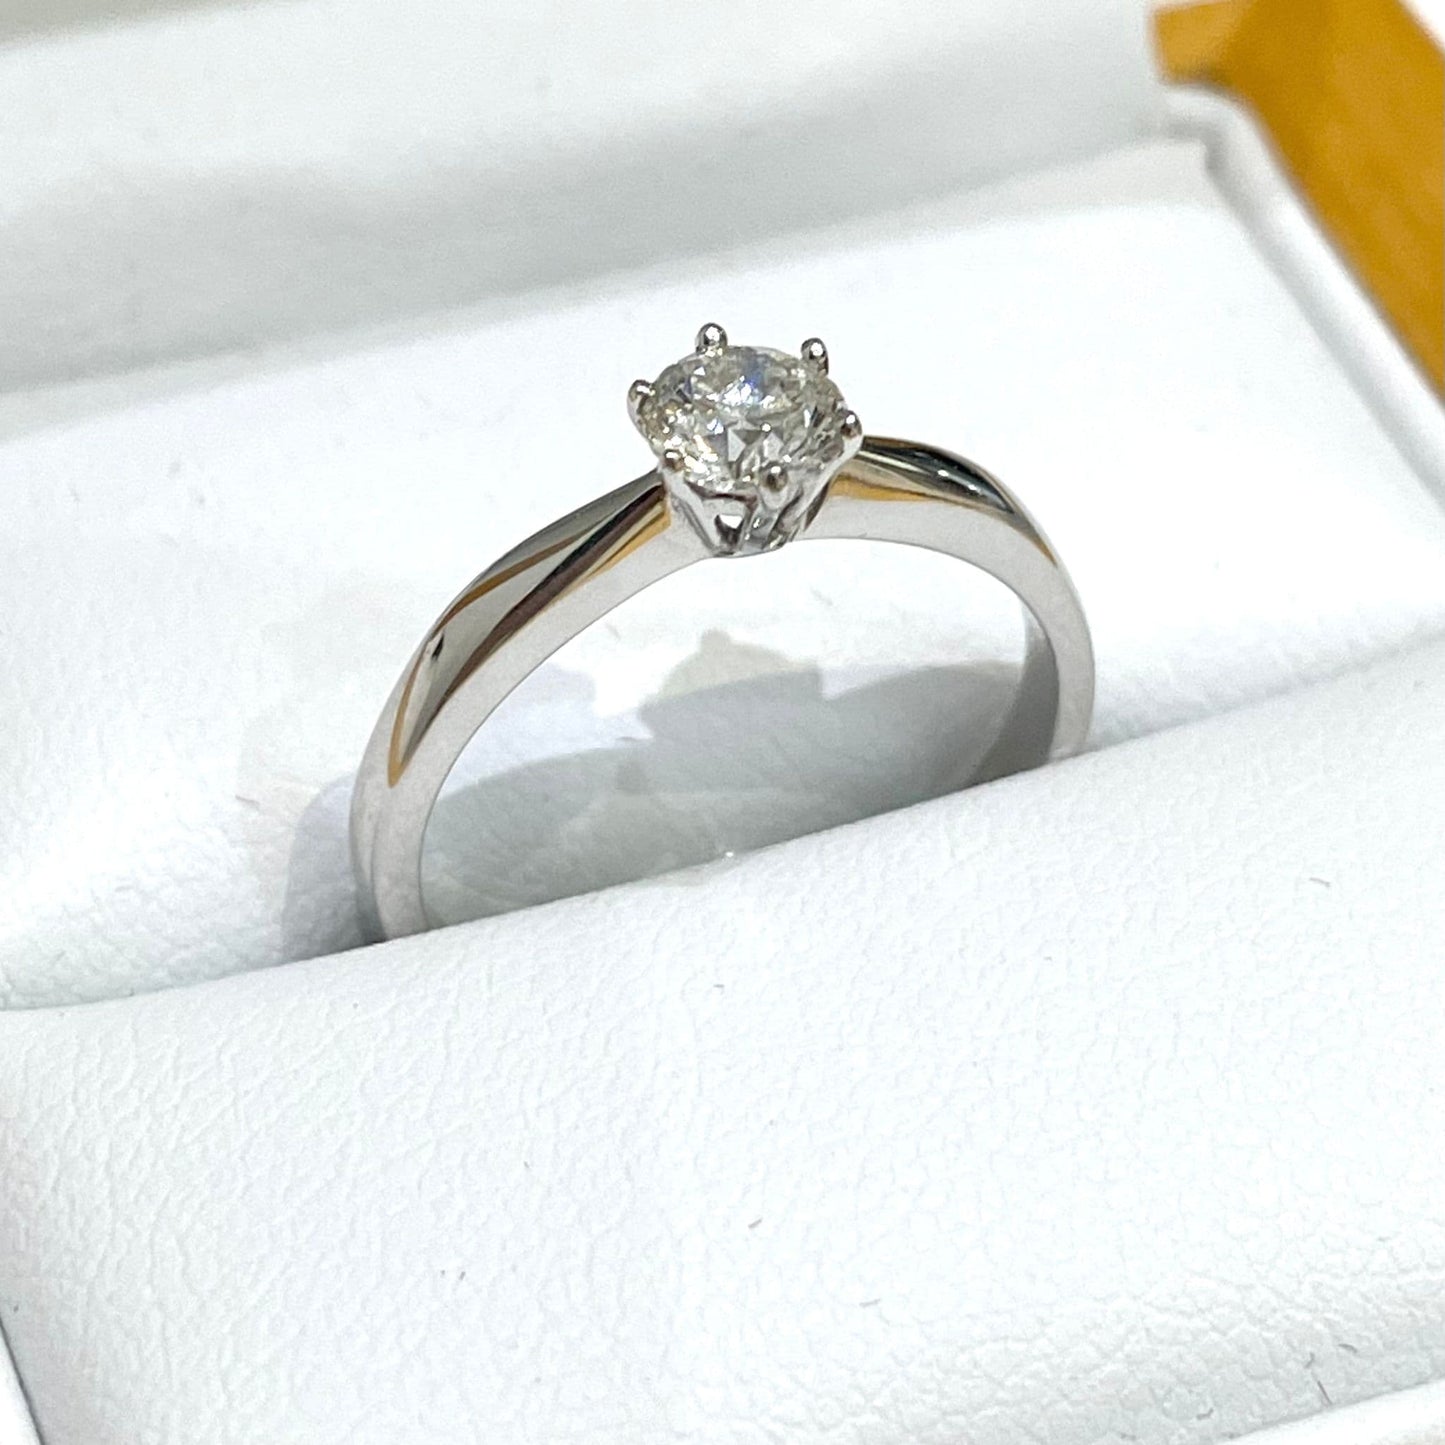 Certified Diamond Solitaire Single Stone White Gold Diamond Engagement Ring 40 points